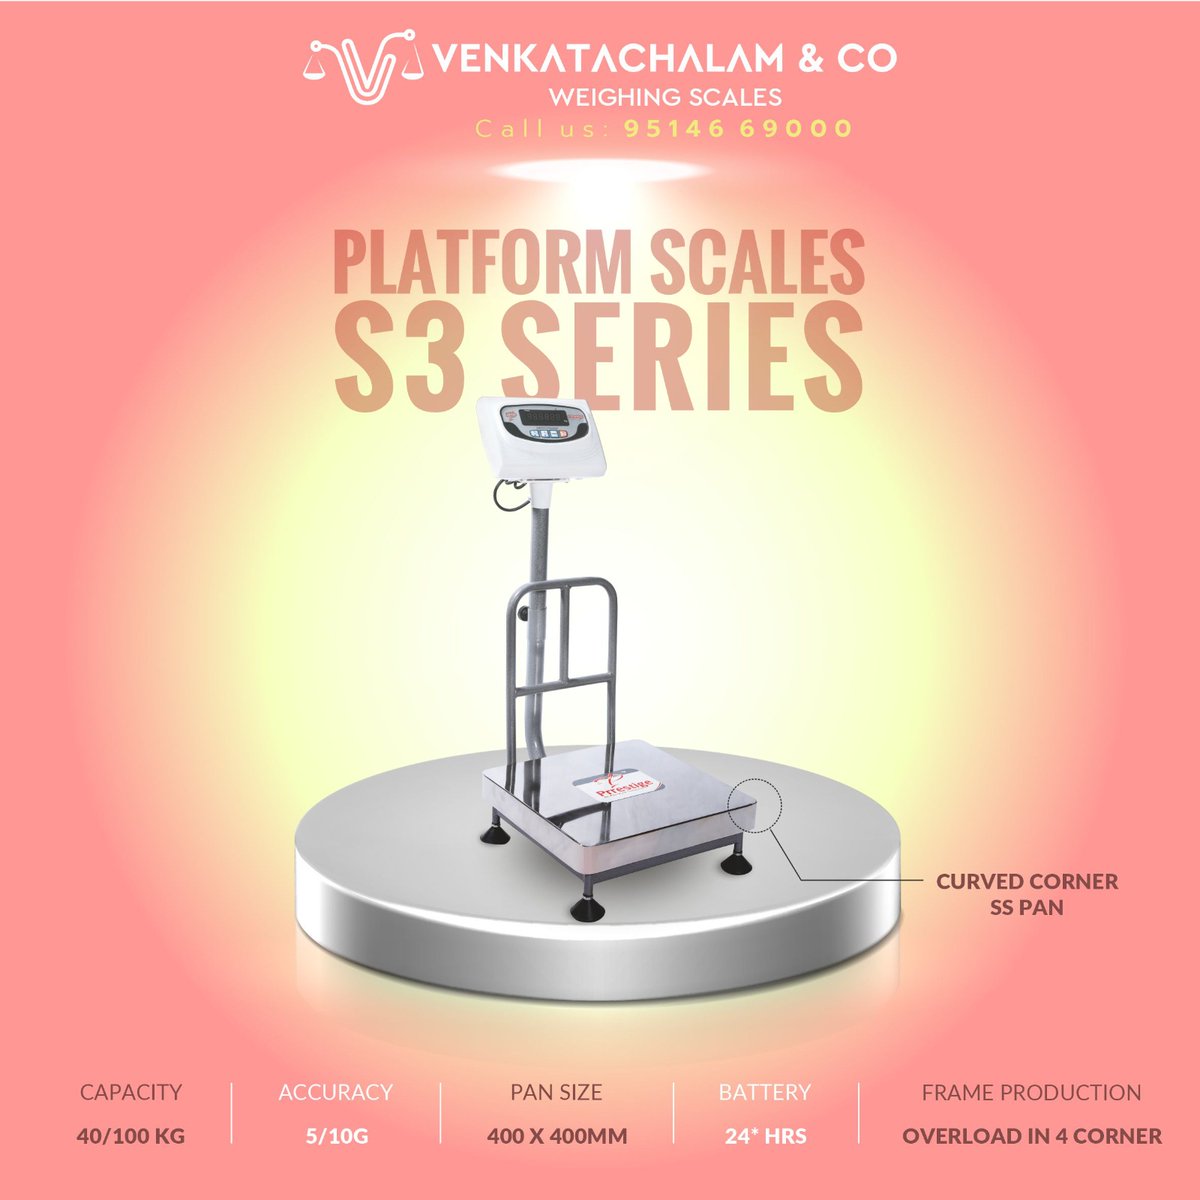 S3 series - PLATFORM SCALE 
Green display,  100 kgs weigh capacity with battery back  for 24 hrs. Also Available in 300kgs capacity.Perfect for #vegetablemarket 
#venkatachalam #VenkatachalamandCo #prrestigescale #coimbatore #weighingmachine #digitalscales #platformscale